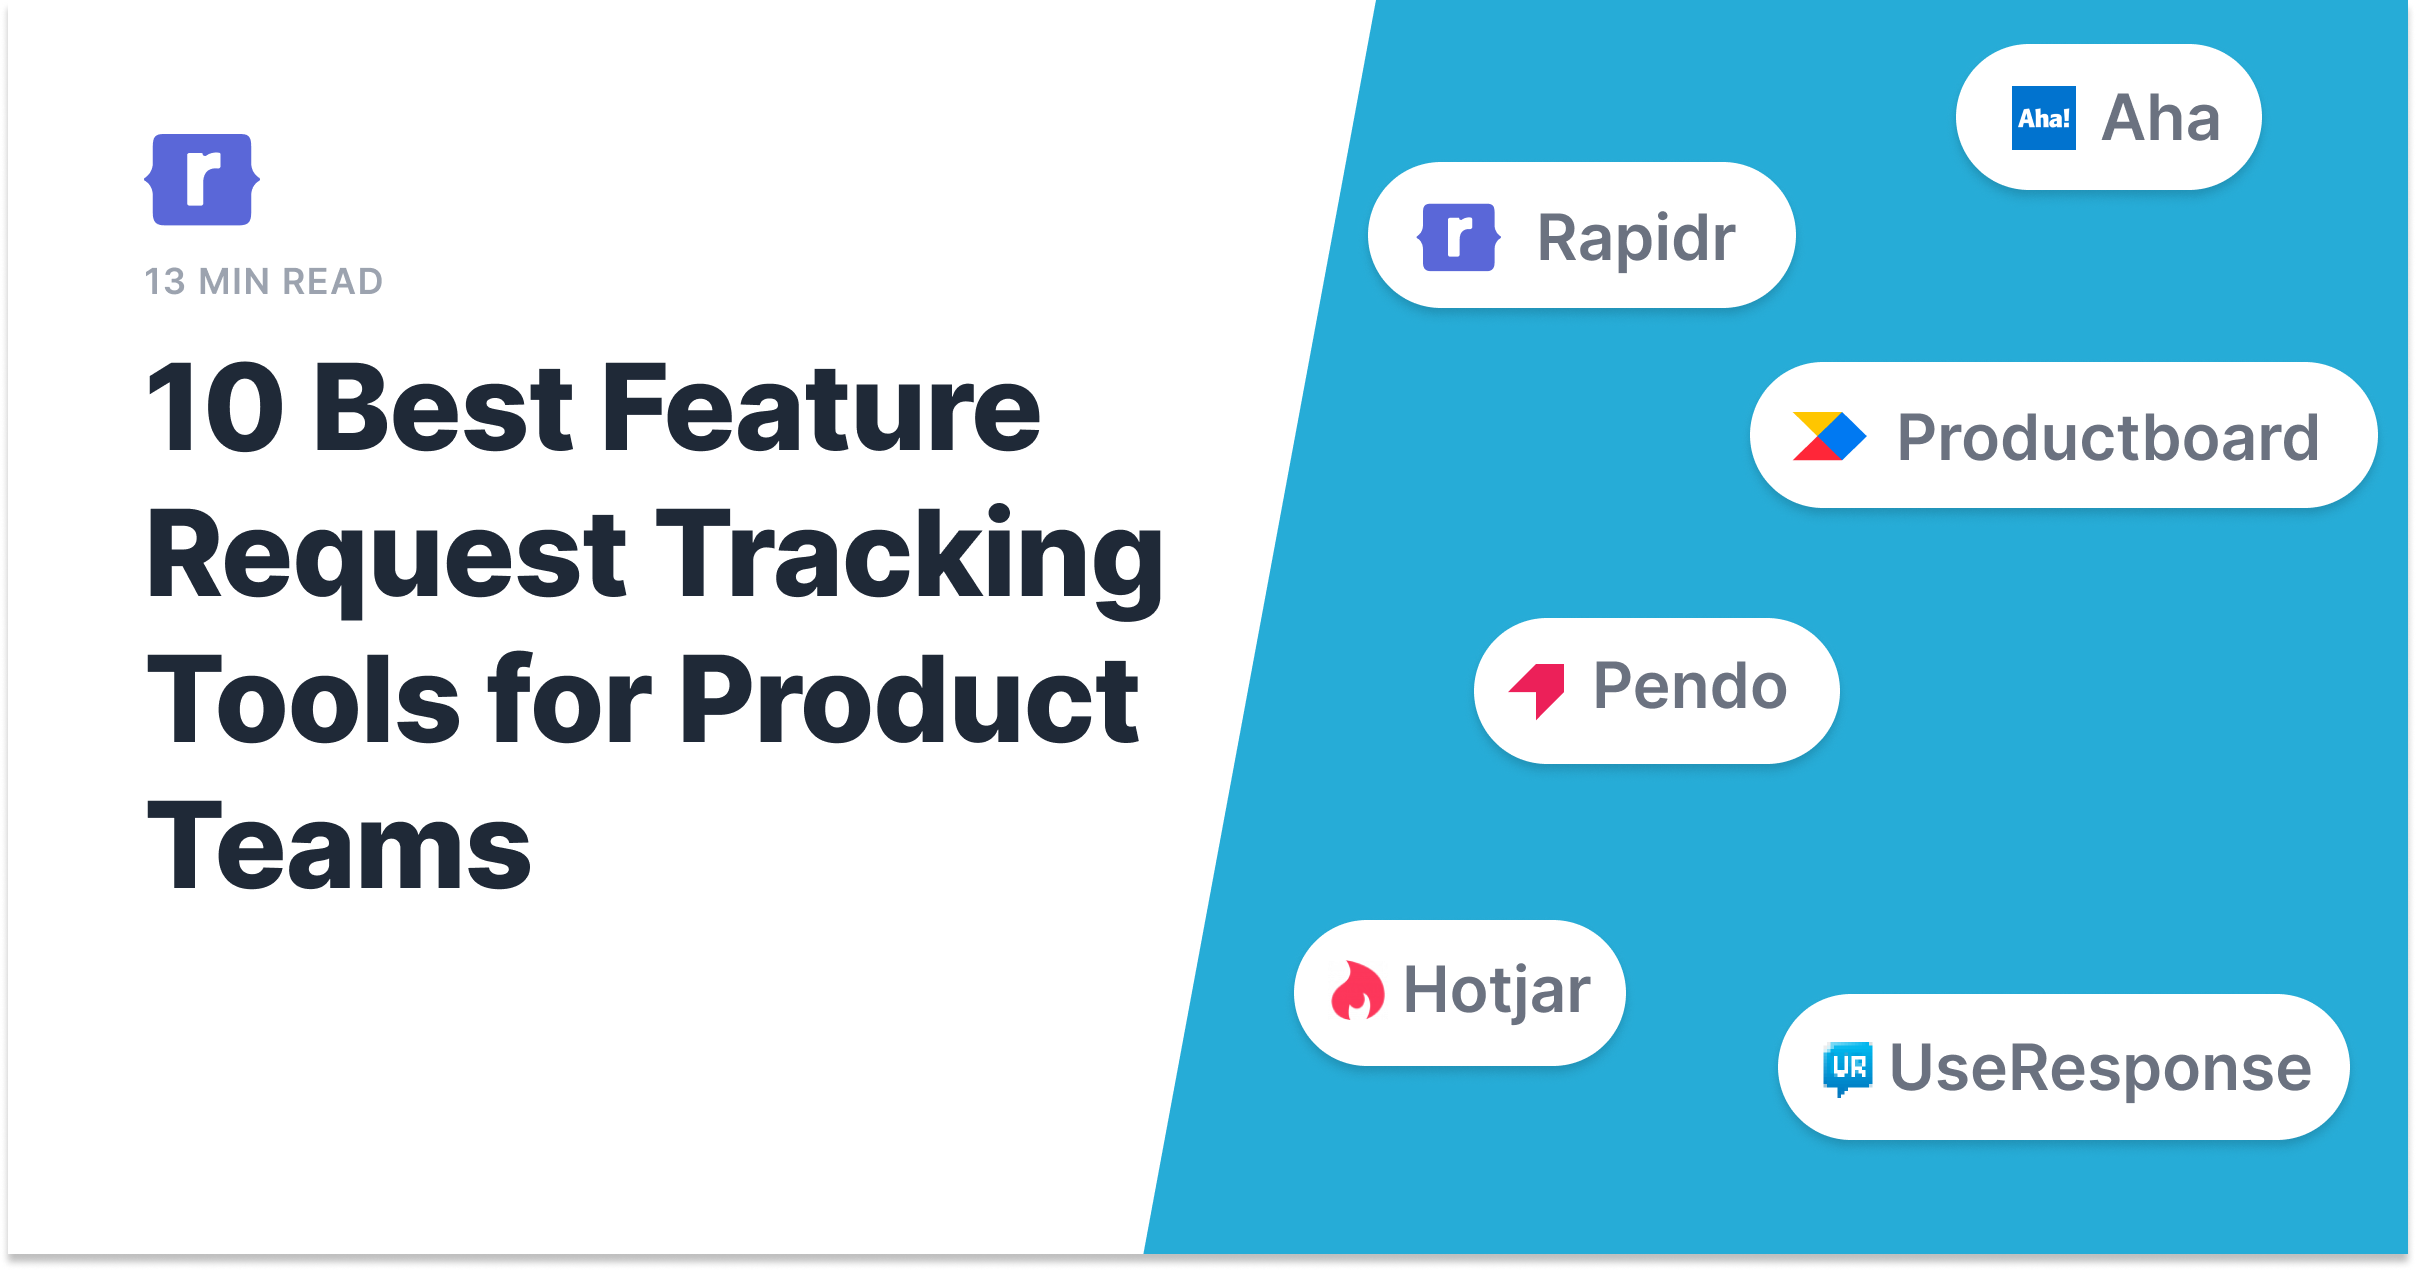 10 Best Feature Request Tracking Tools for Product Teams